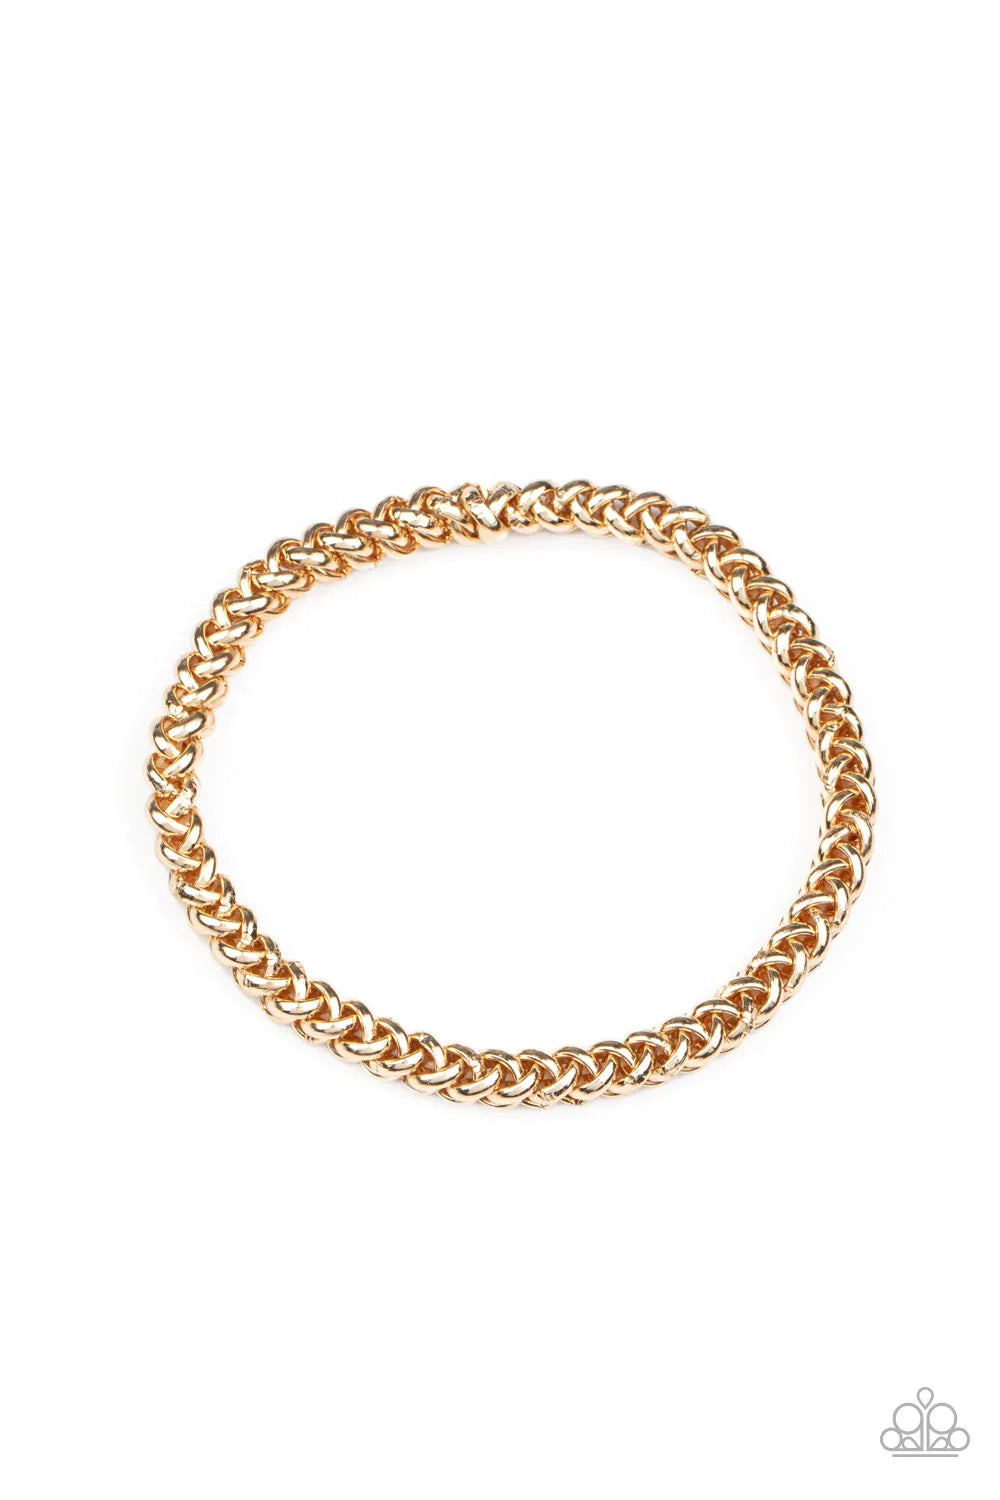 Setting the Pace - Gold Bracelet